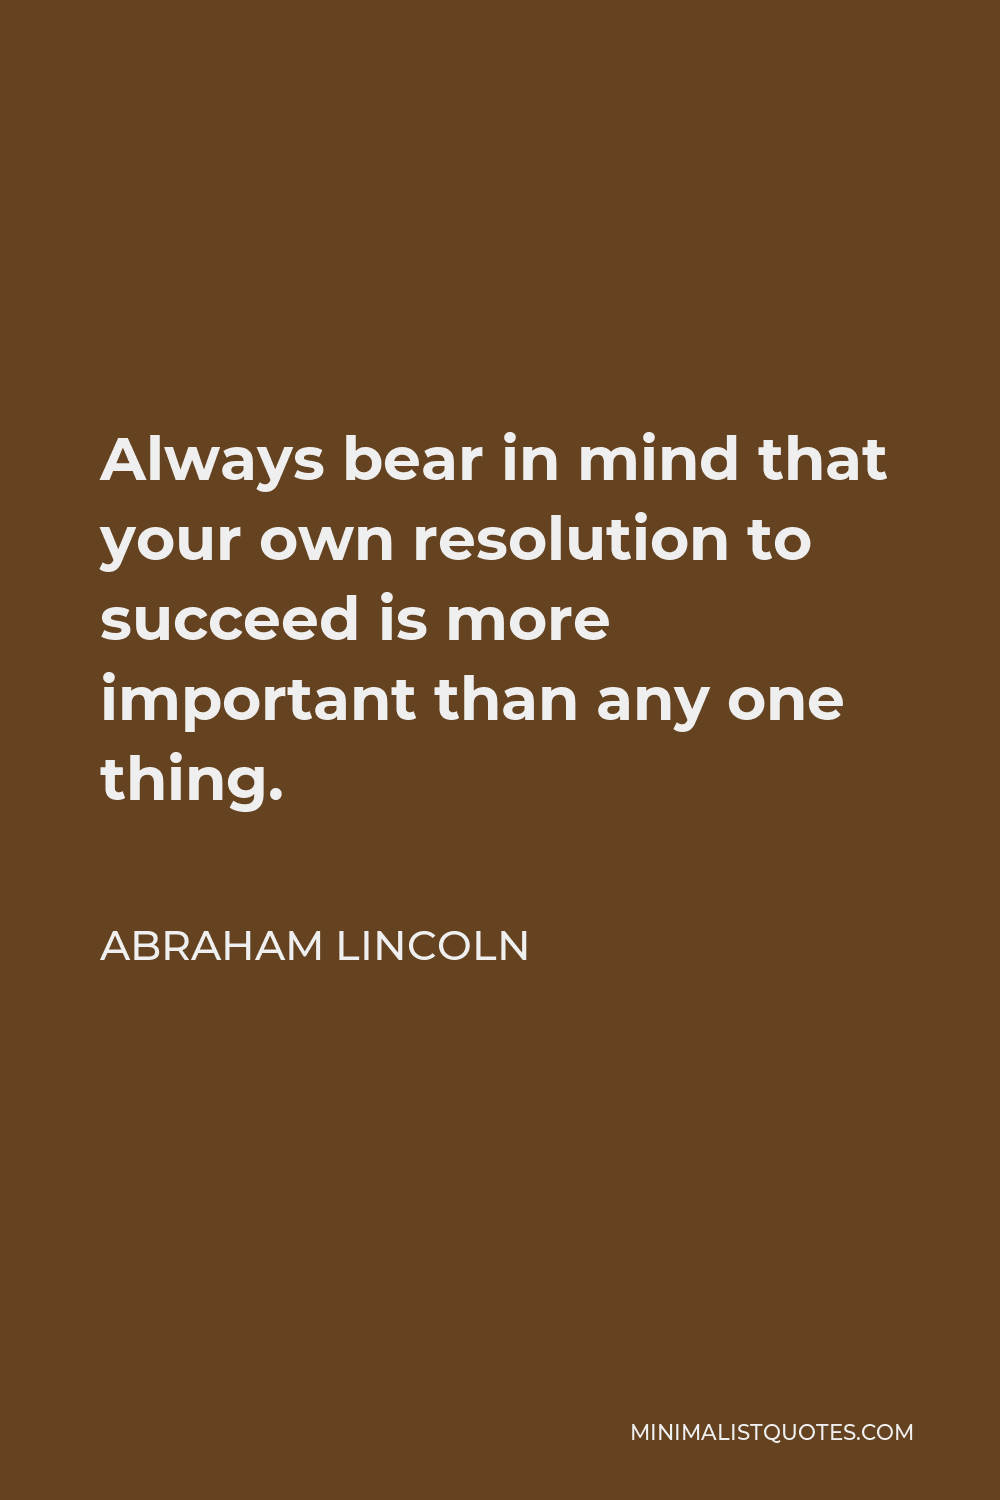 Abraham Lincoln Quote: Always bear in mind that your own resolution to ...